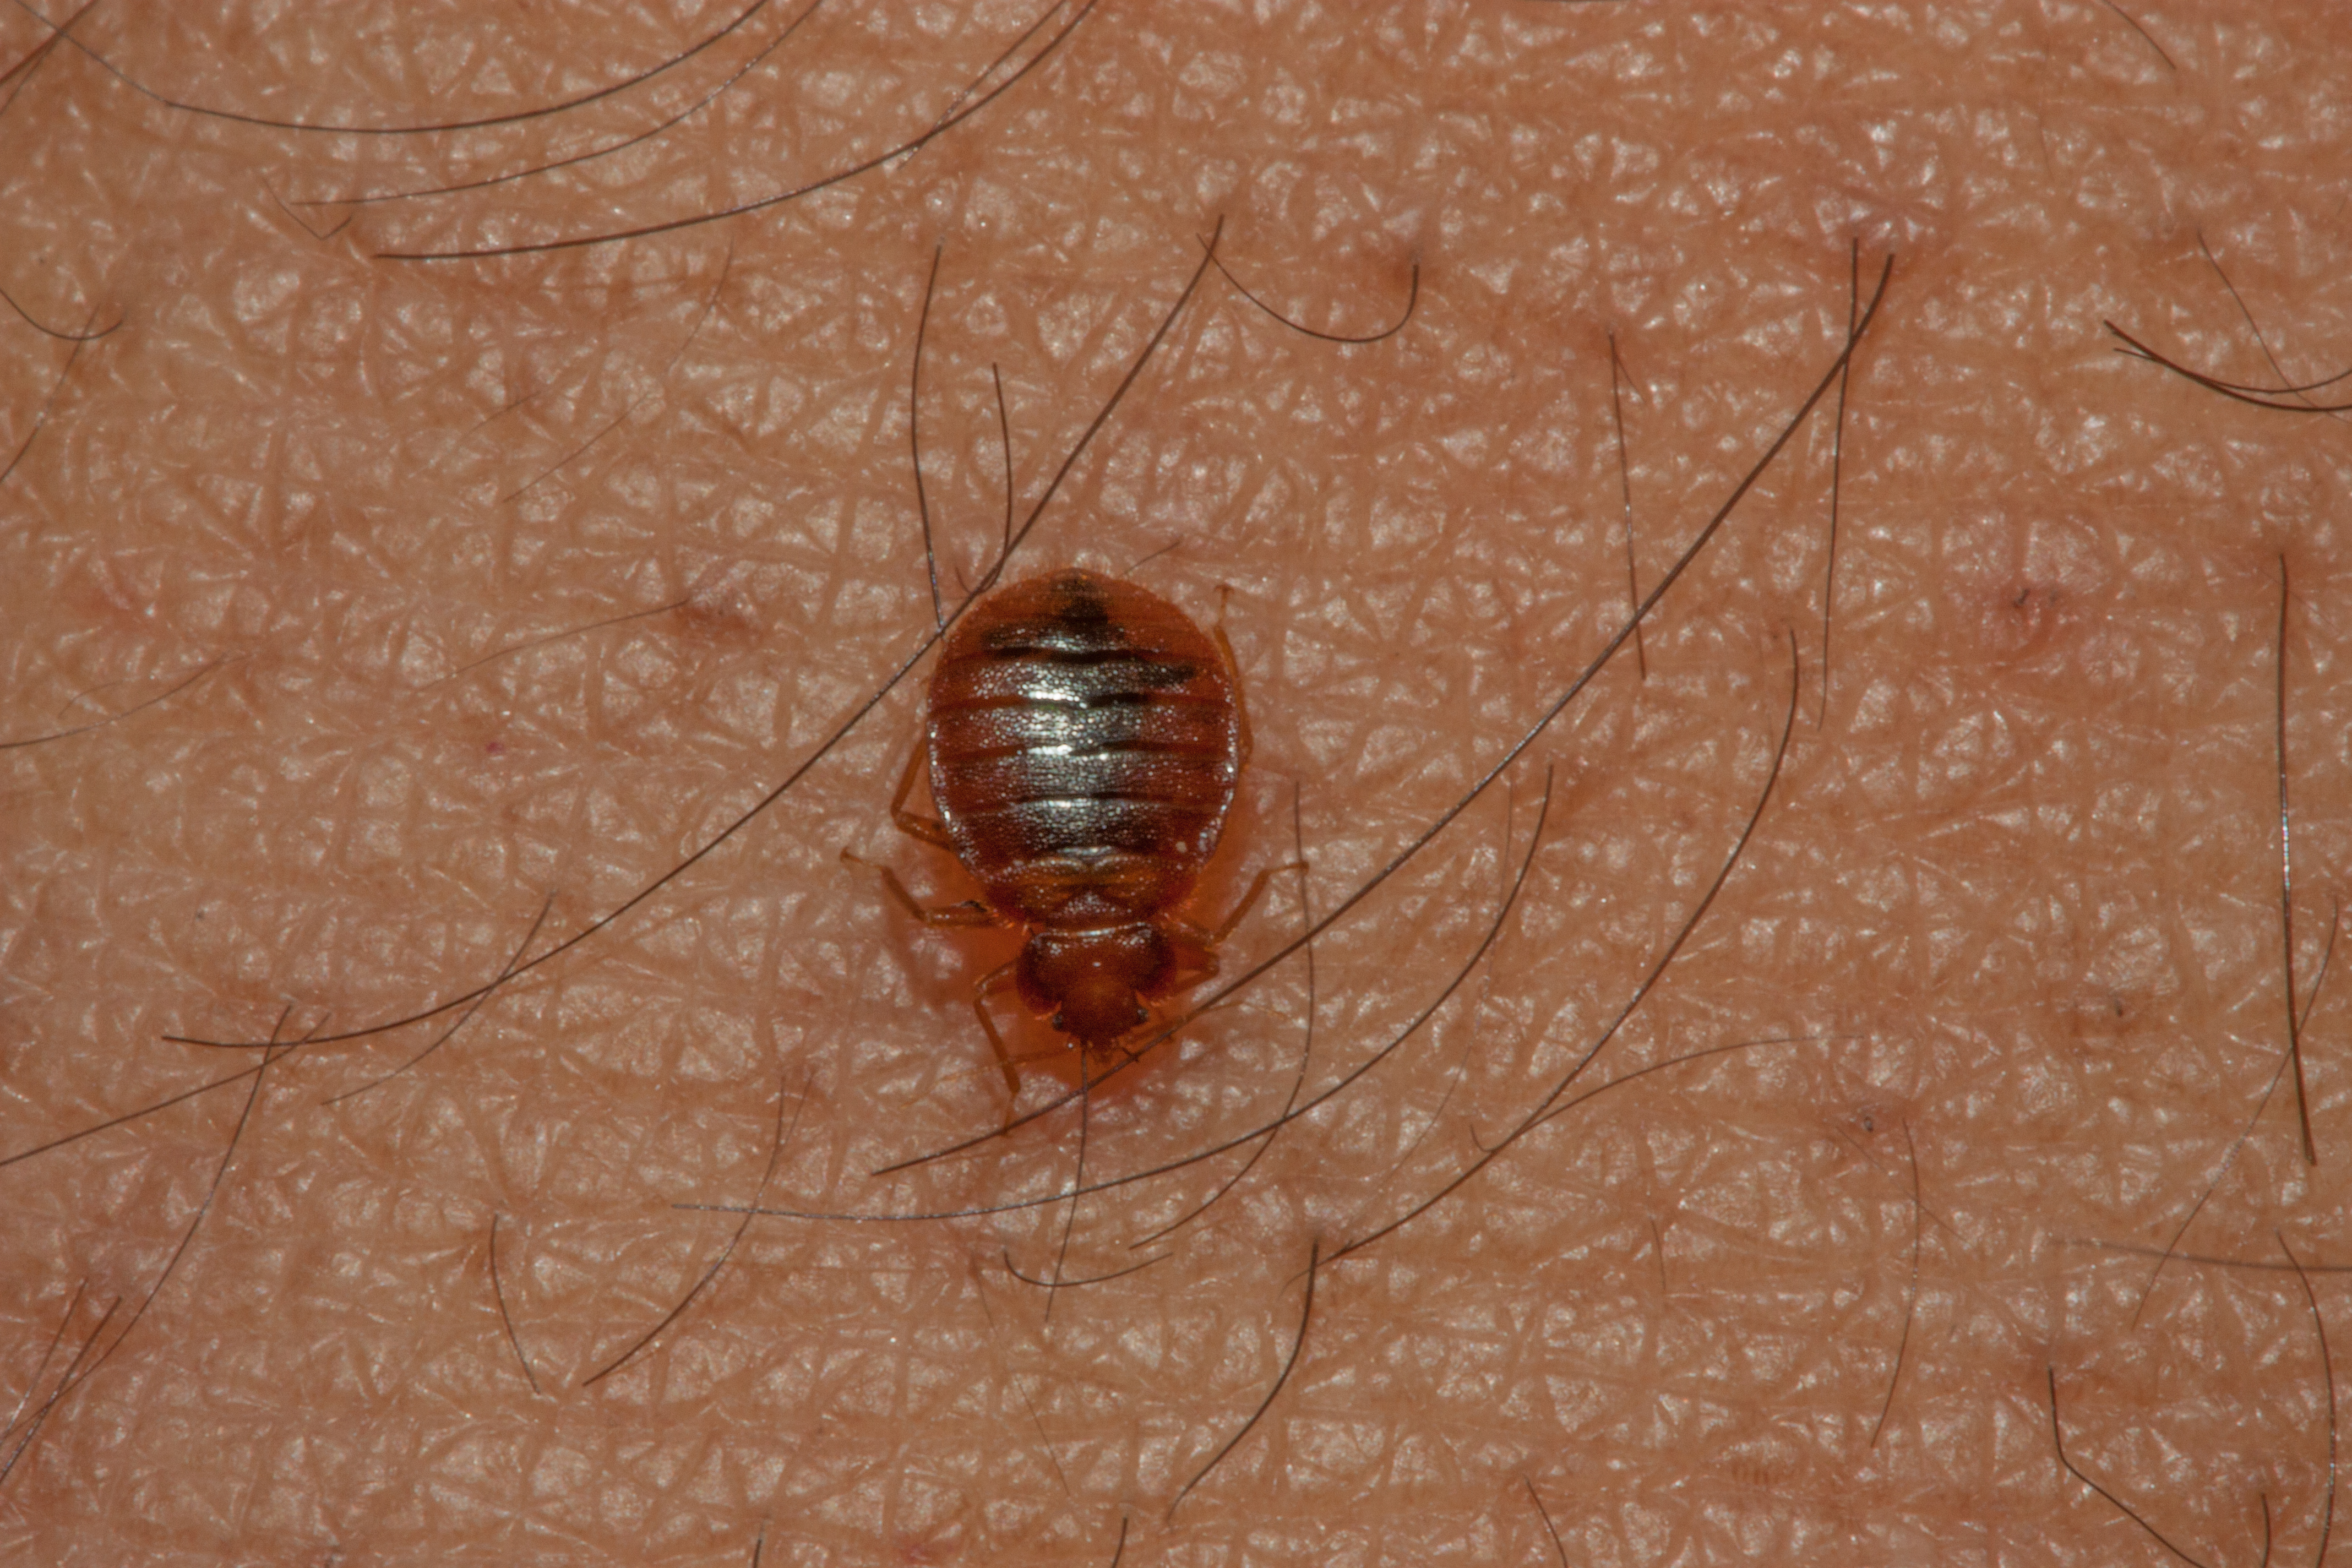 Bed Bugs Pictures & Videos | How they look like? - QPM